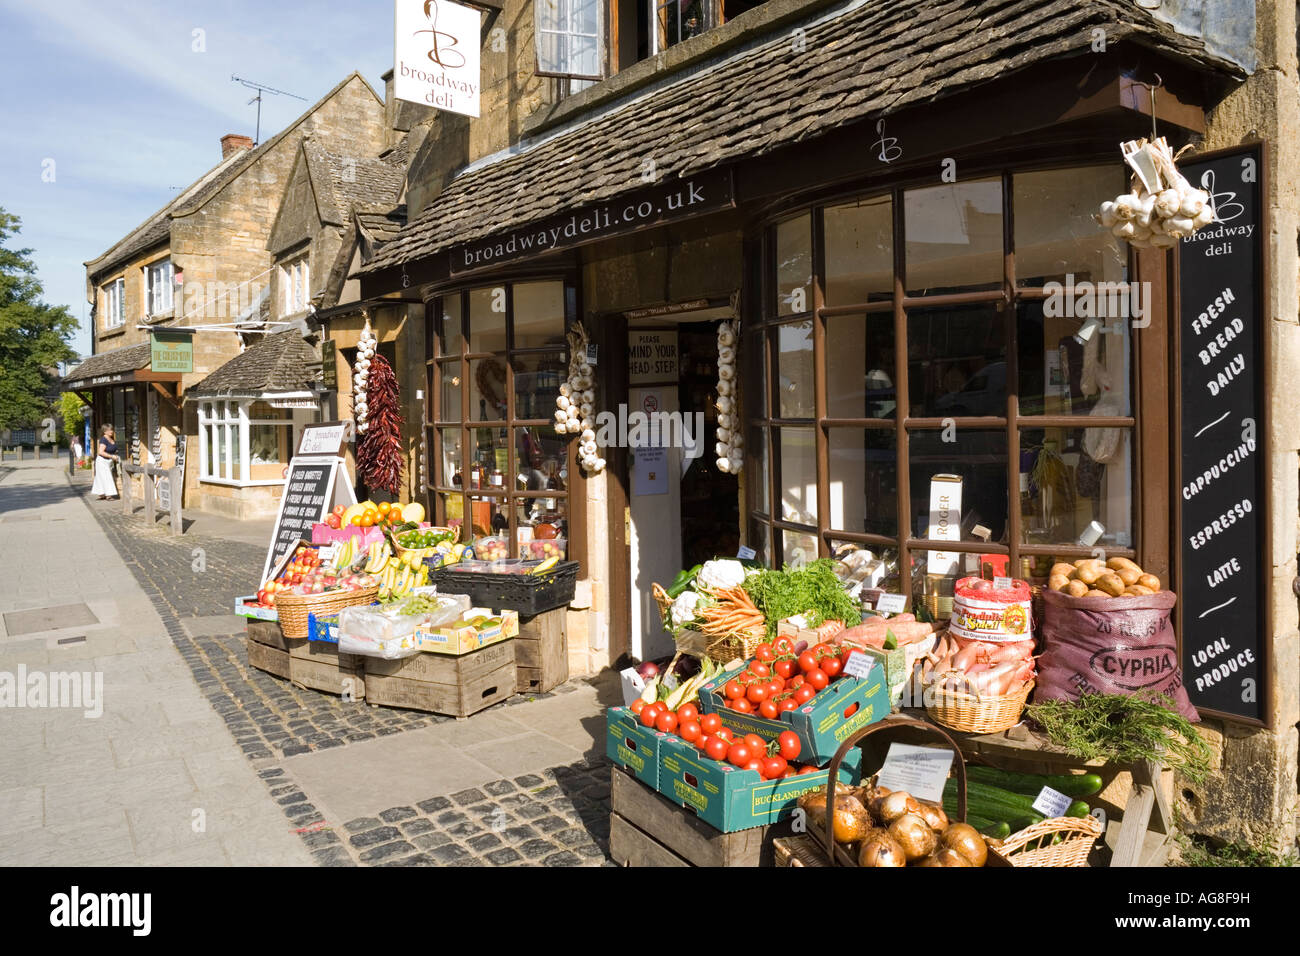 A delicatessan in the High Street in the Cotswold village of Broadway, Worcestershire Stock Photo